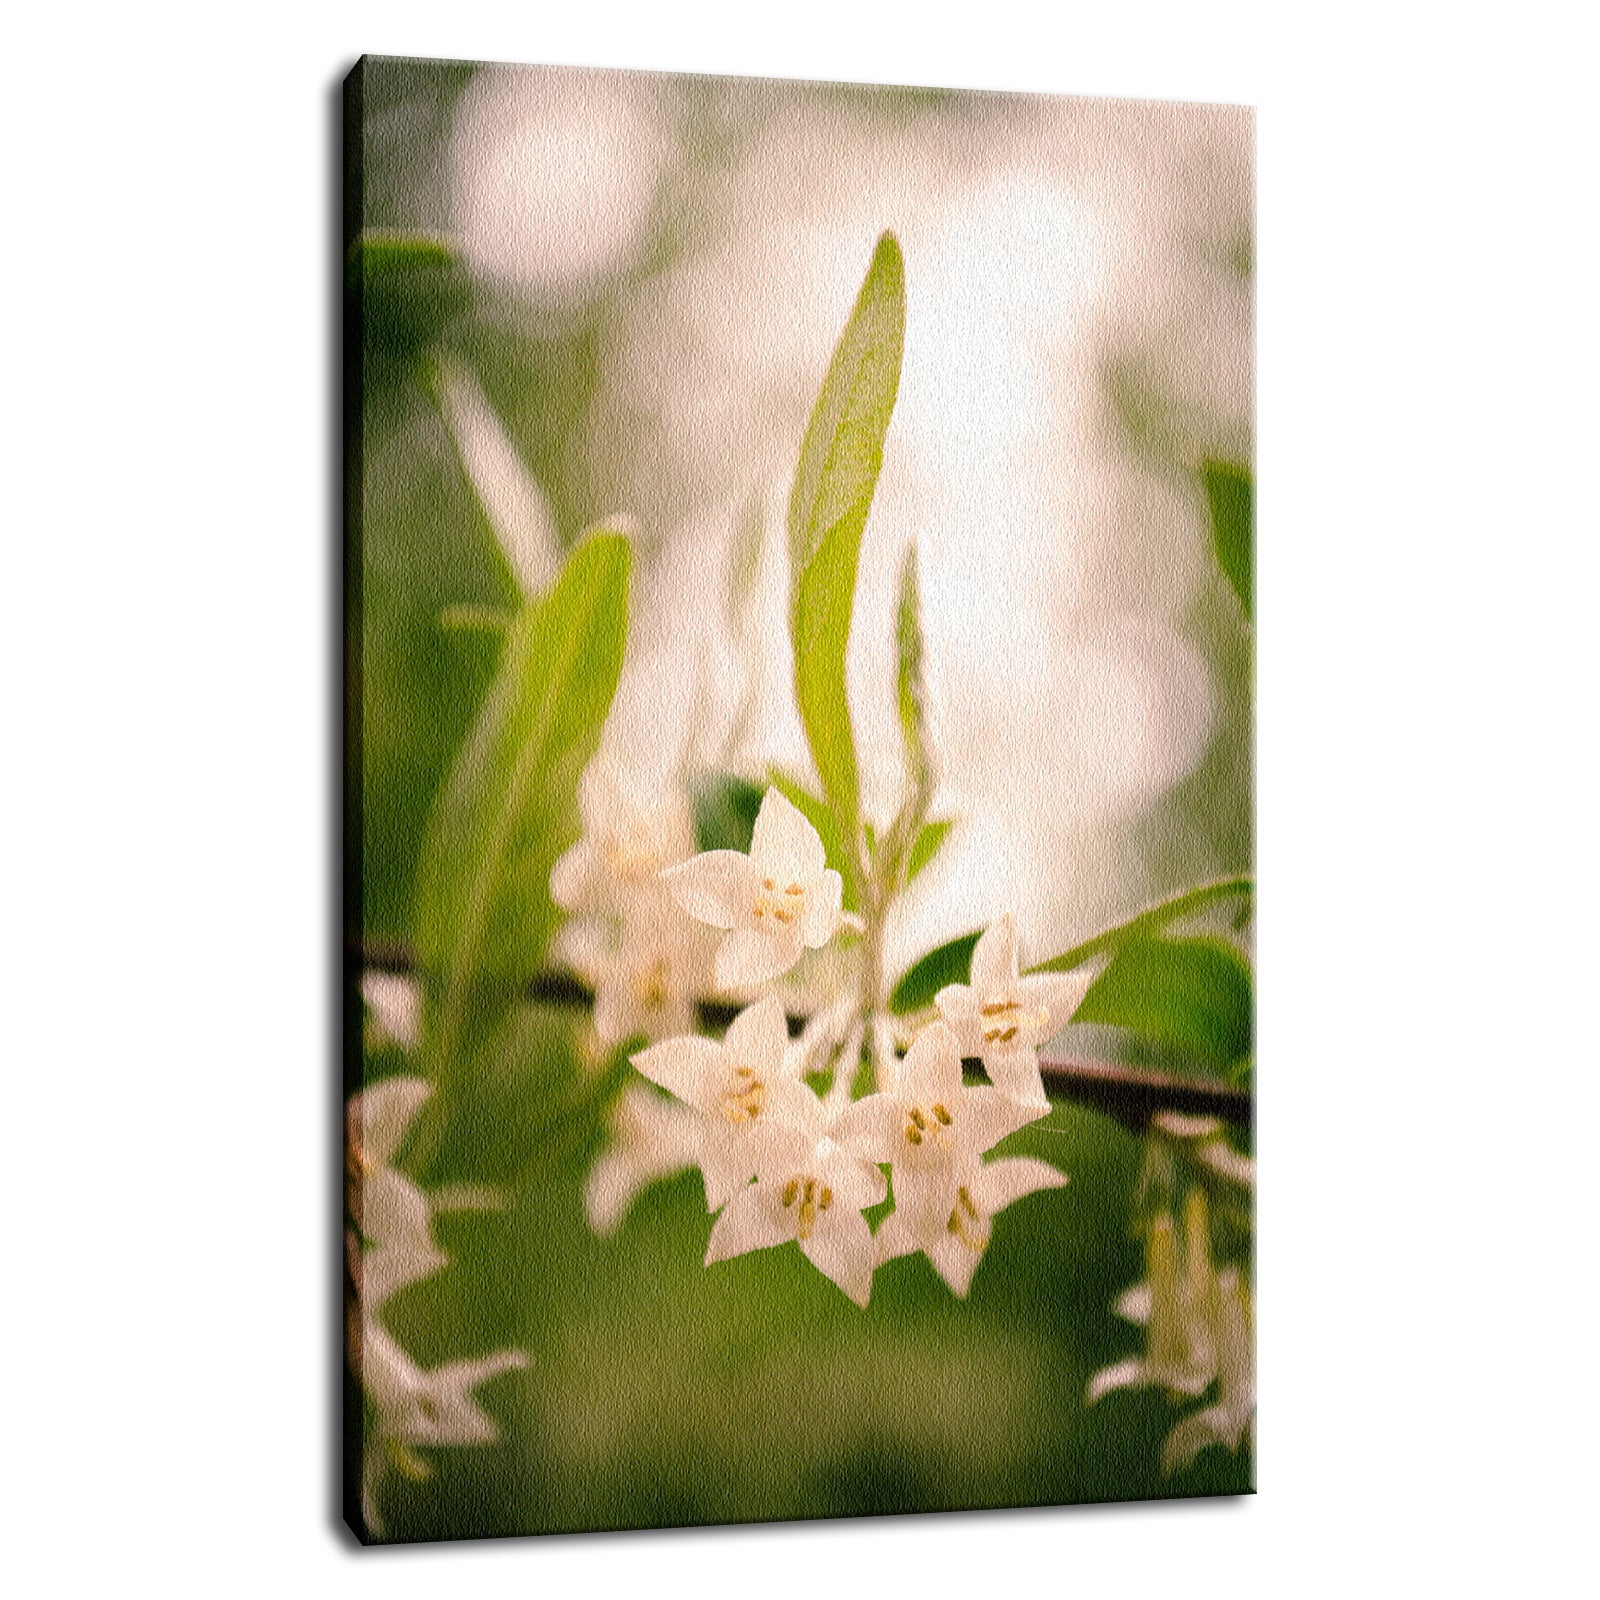 Floral Tranquility Nature / Floral Photo Fine Art Canvas Wall Art Prints  - PIPAFINEART